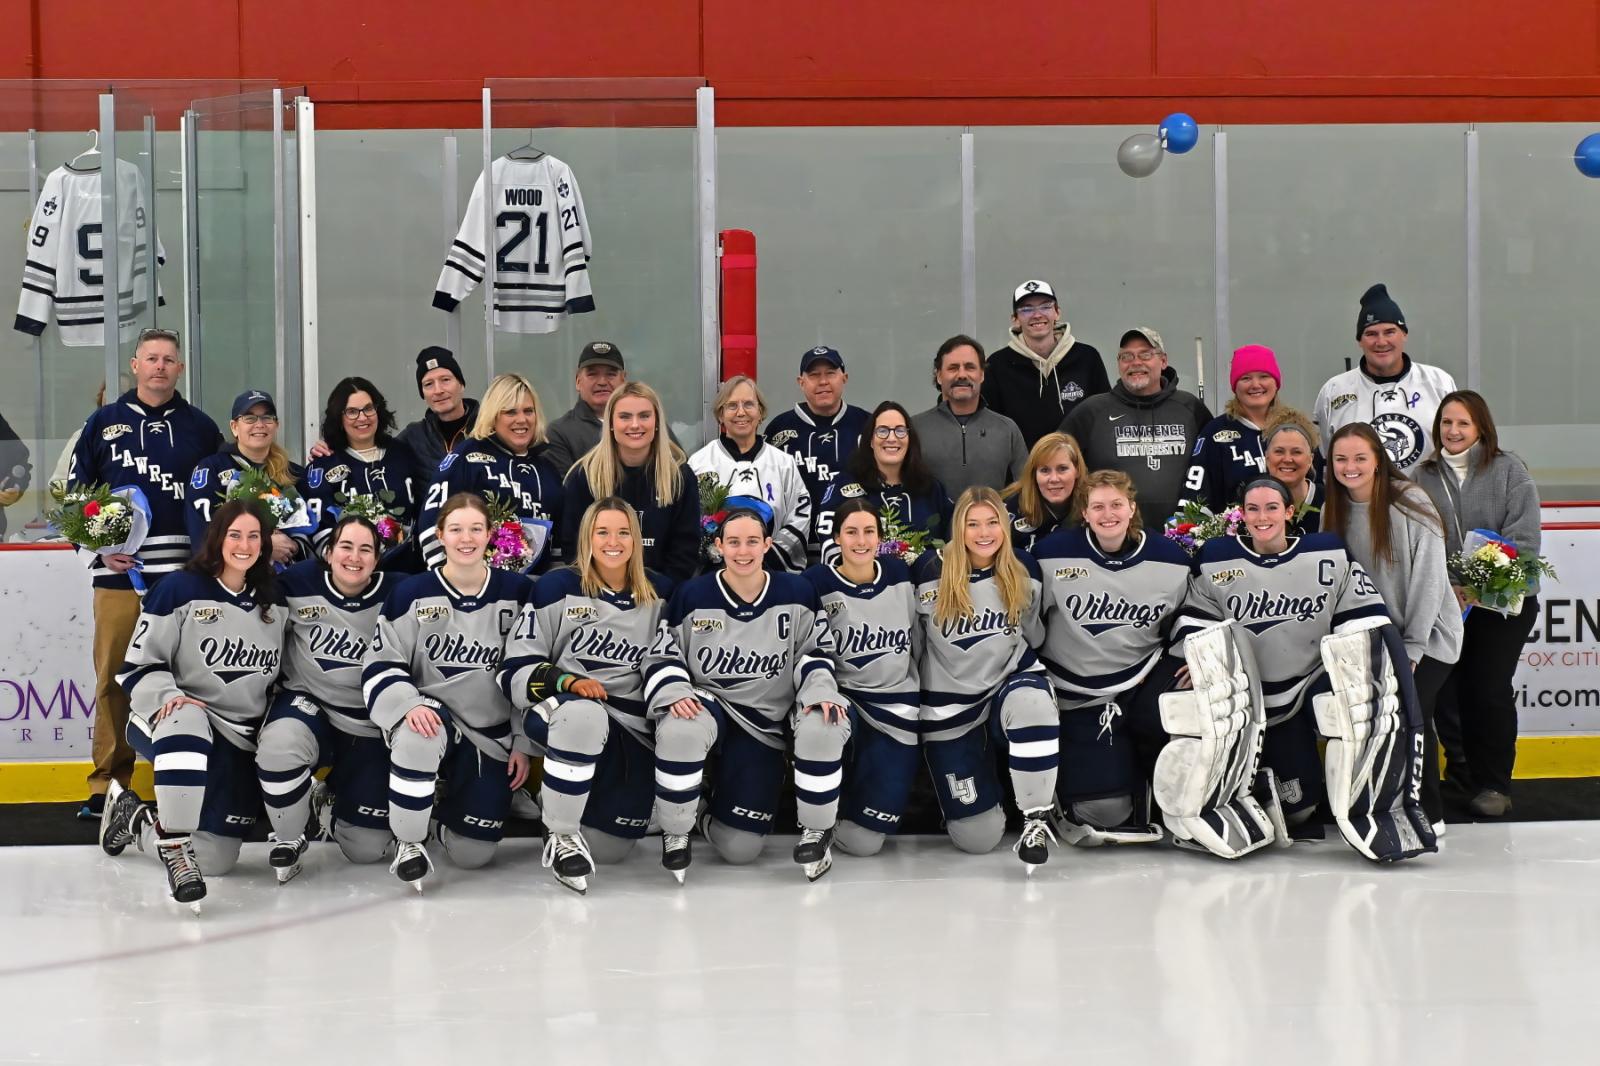 Nine seniors from the women's hockey team pose for a photo with family during Senior Day.